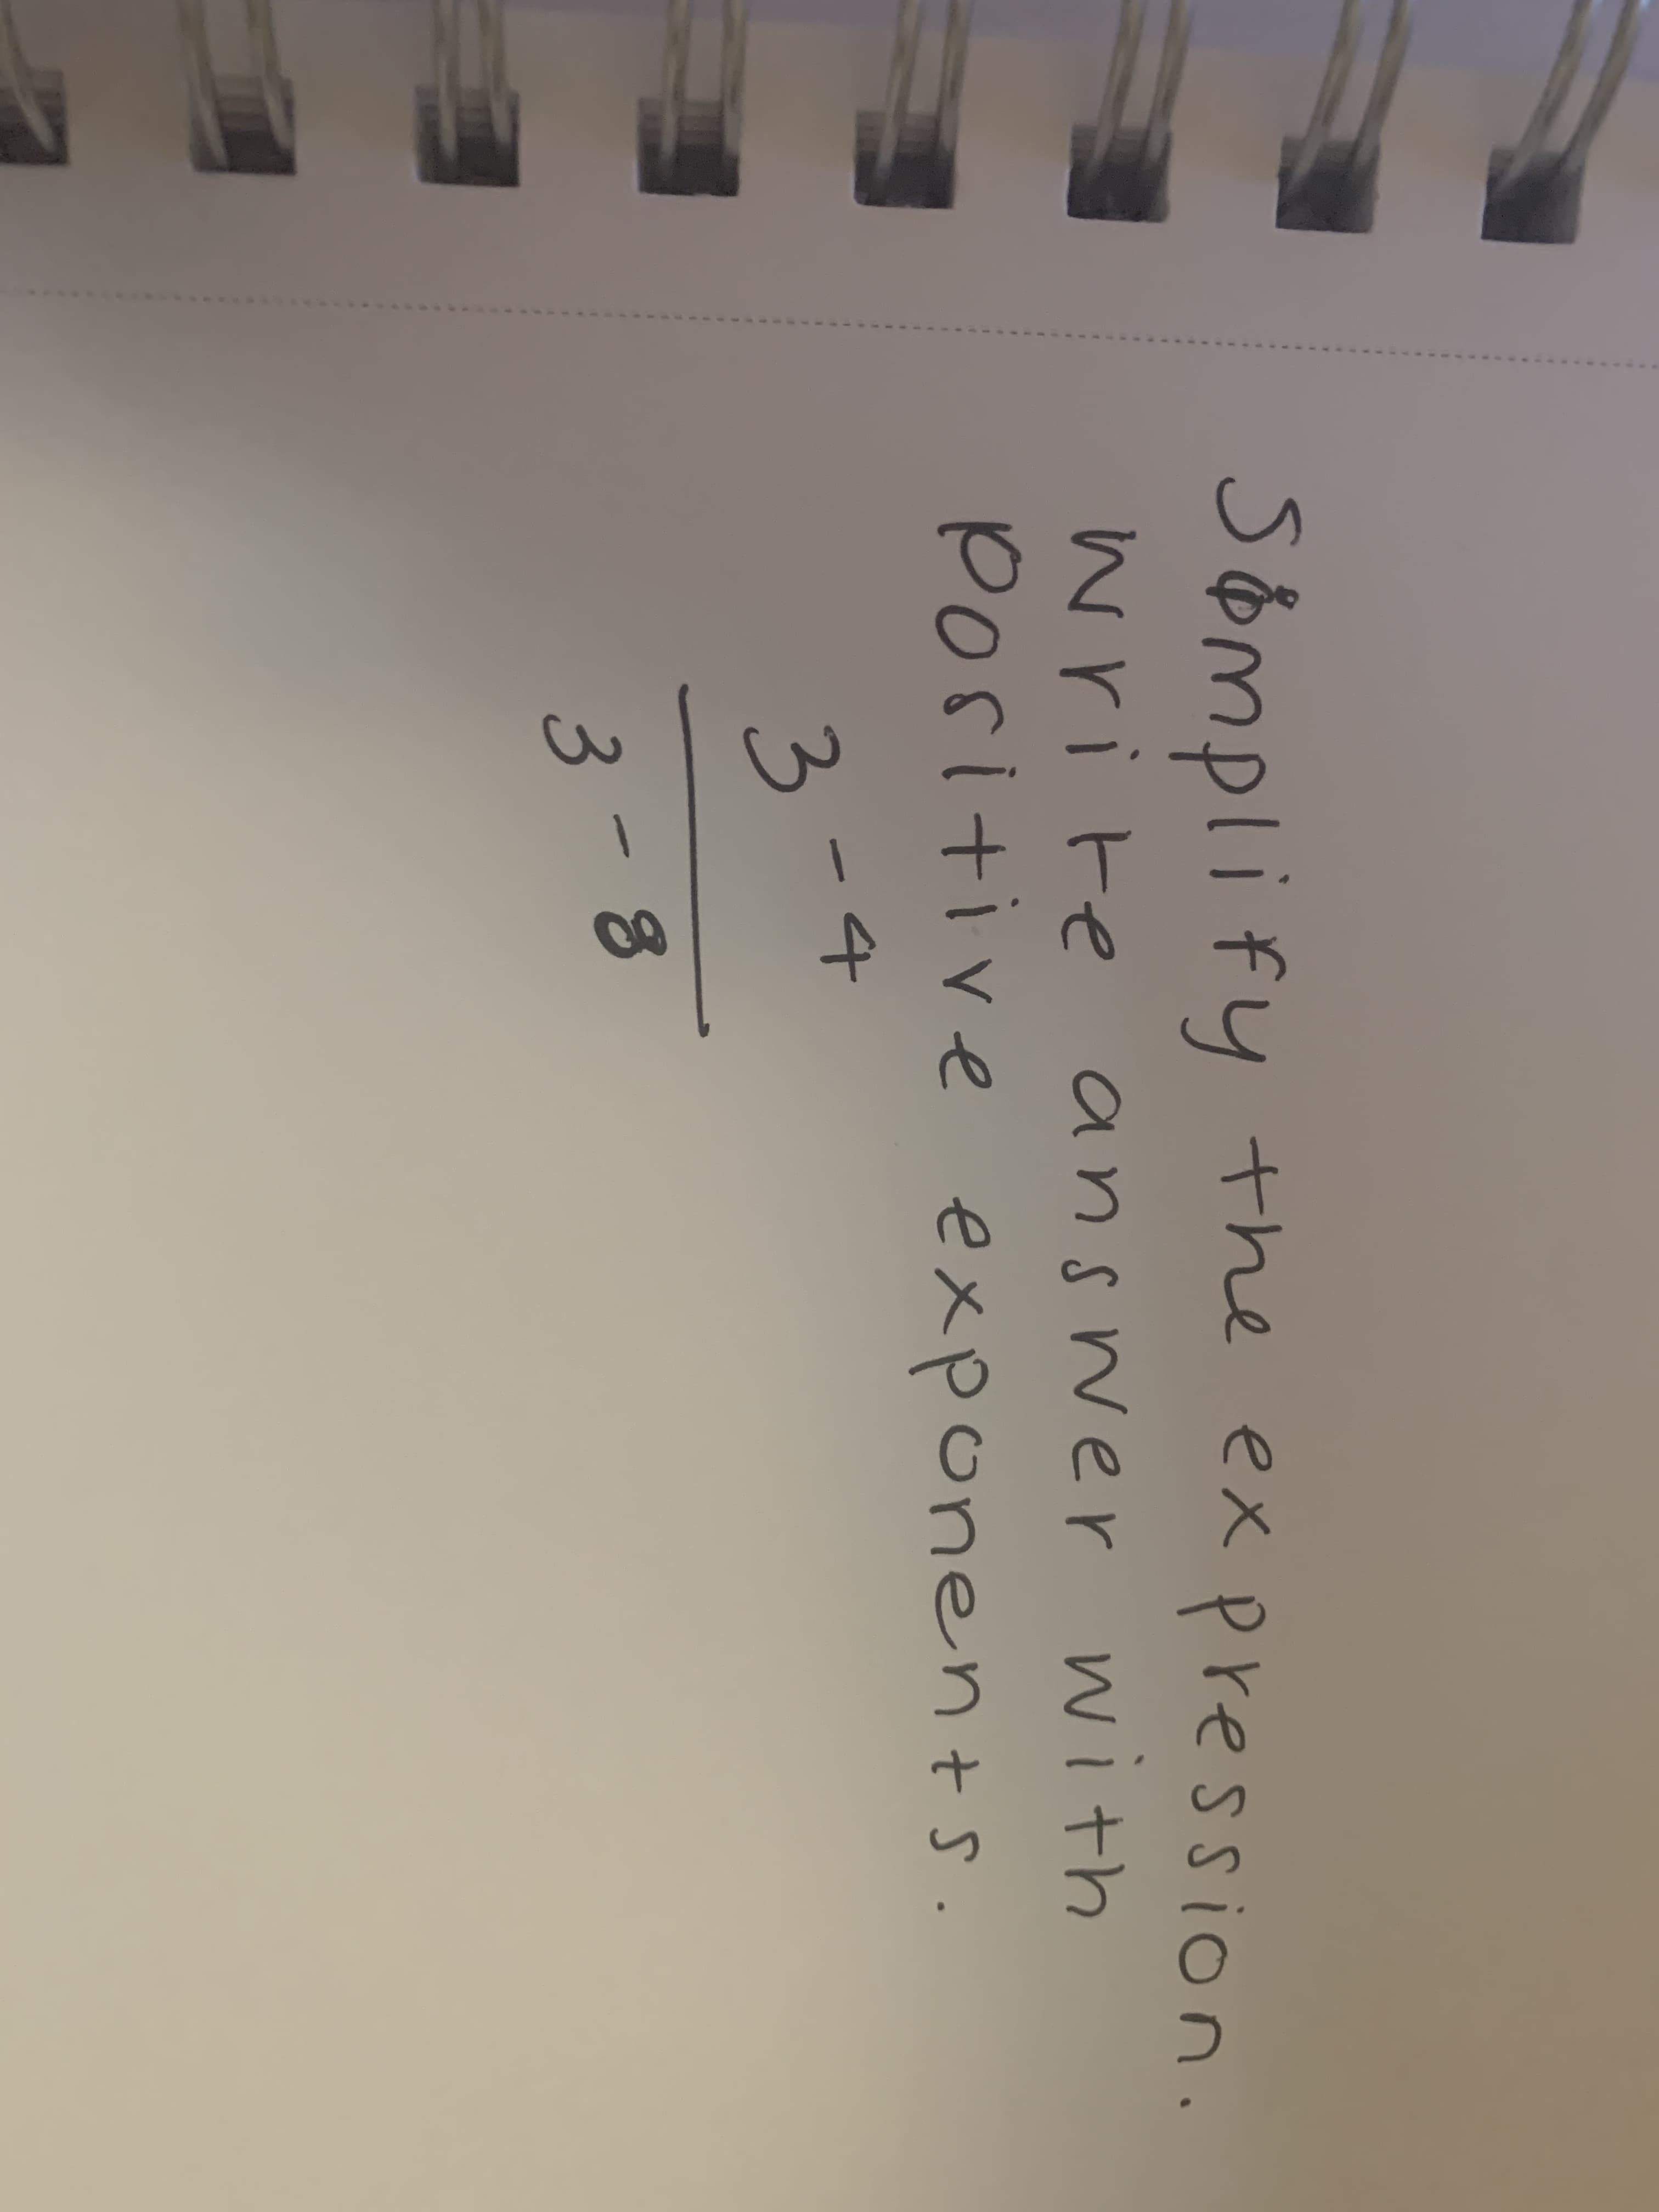 Somplify
the ex pression.
write
write answer with
positive exponents.
3-4
3-8
